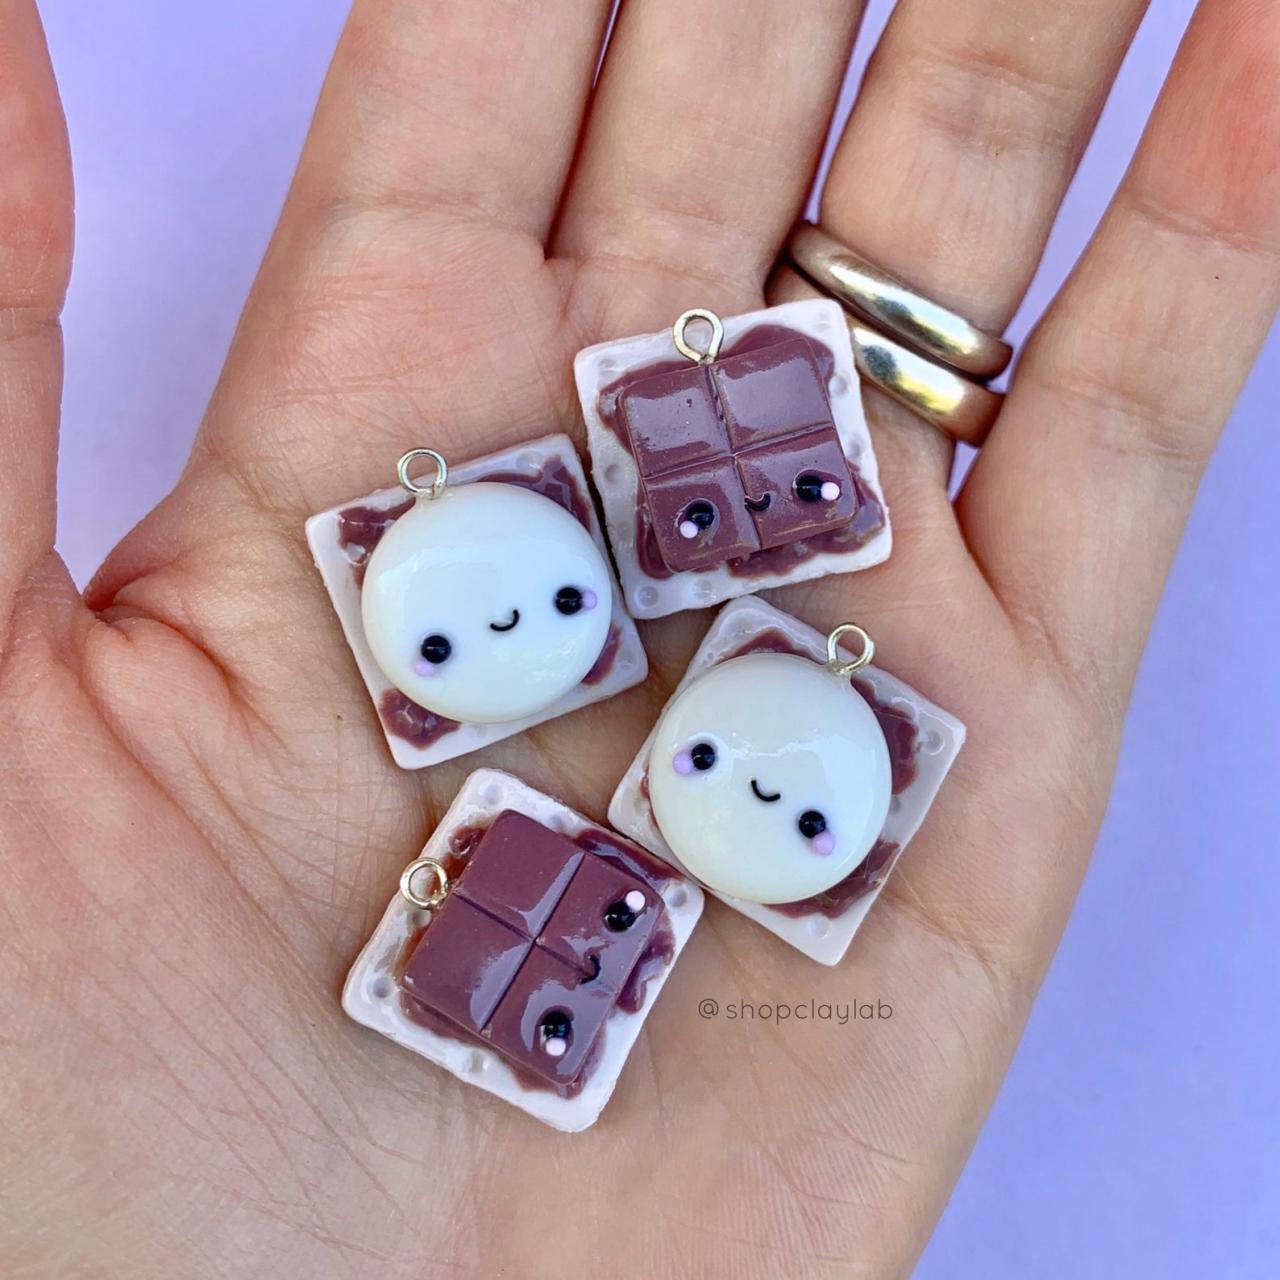 Bff Kawaii S’mores Polymer Clay Charm Pendants Set| Friendship Necklace| Cute Crochet Progress Keepers| Kawaii Stitch Markers| Funny Gifts